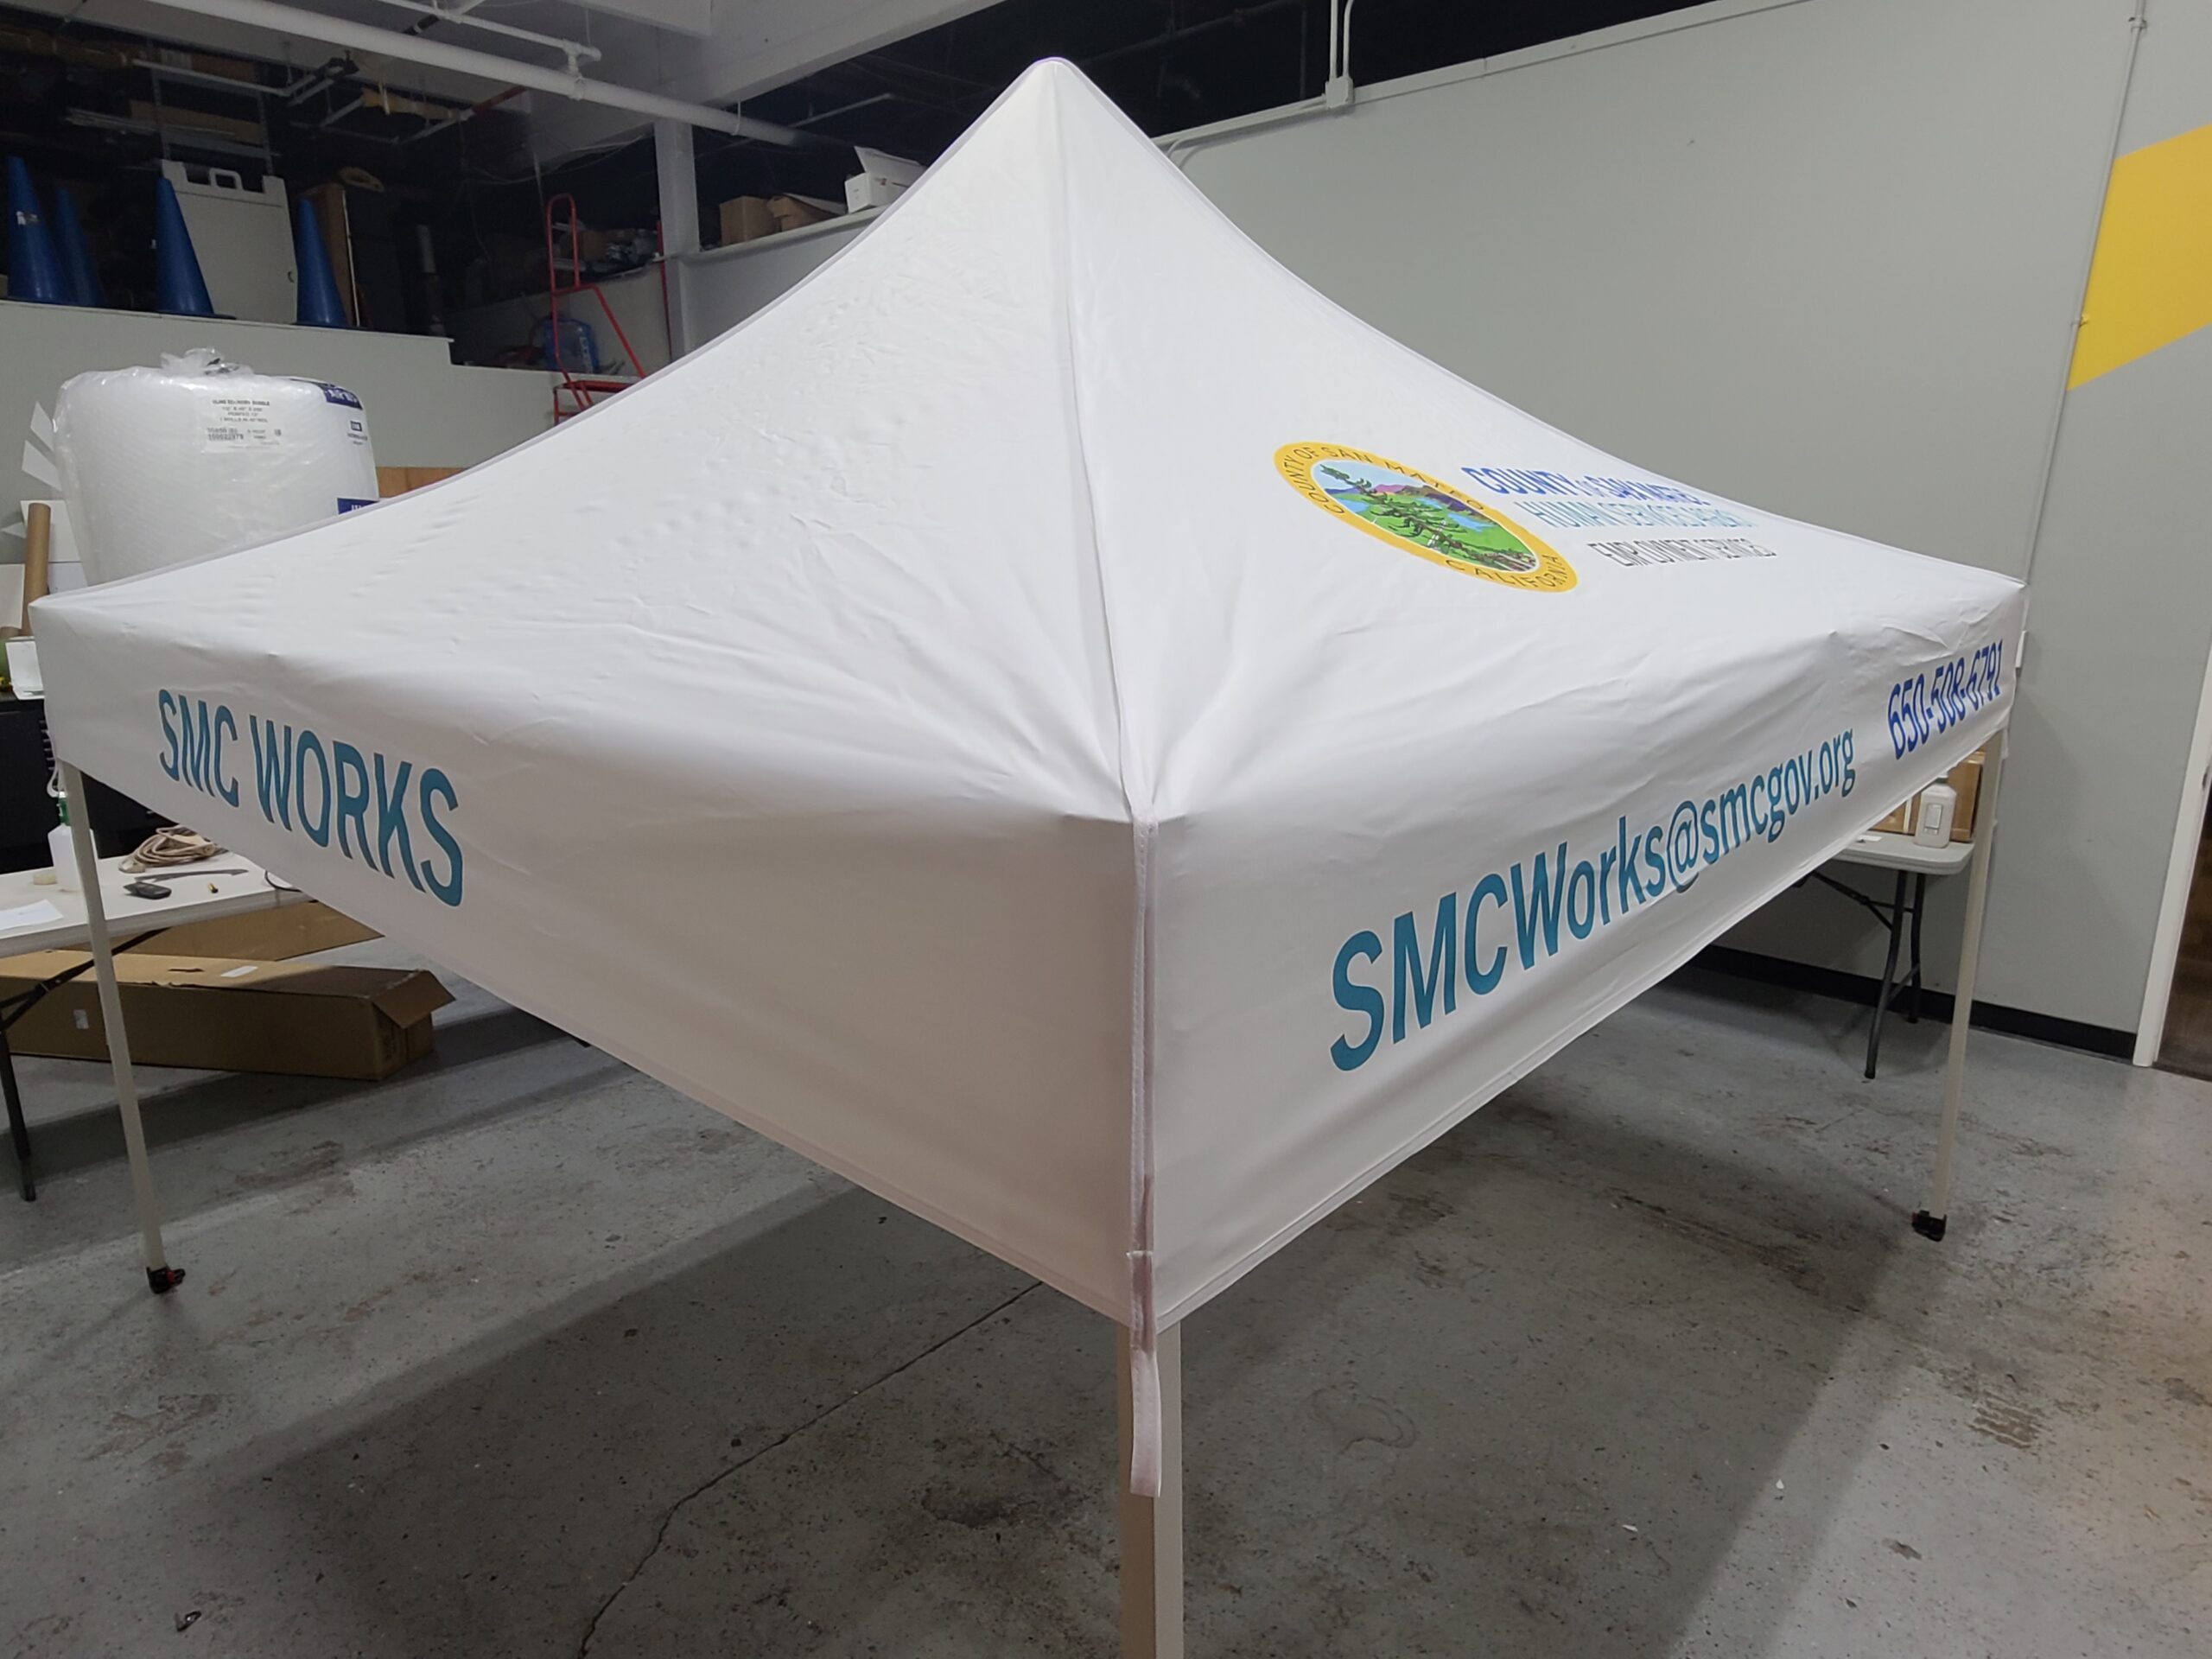 Outdoor display tent with graphics